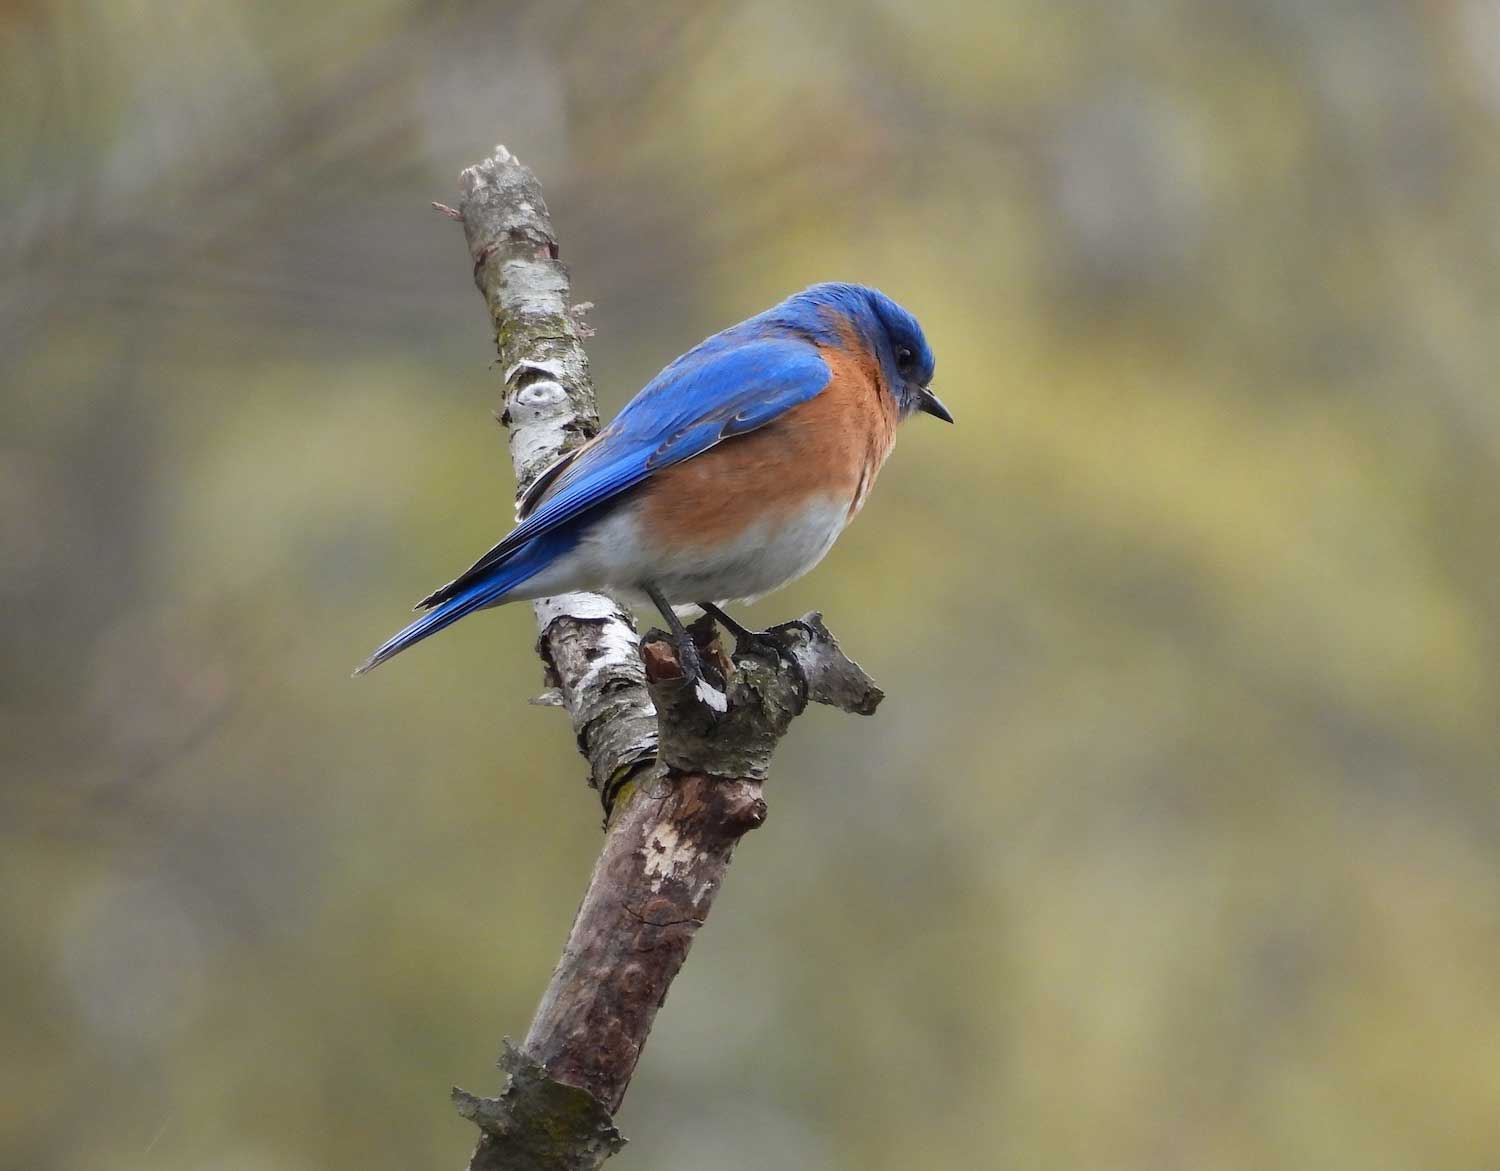 An eastern bluebird perched on a bare tree branch.